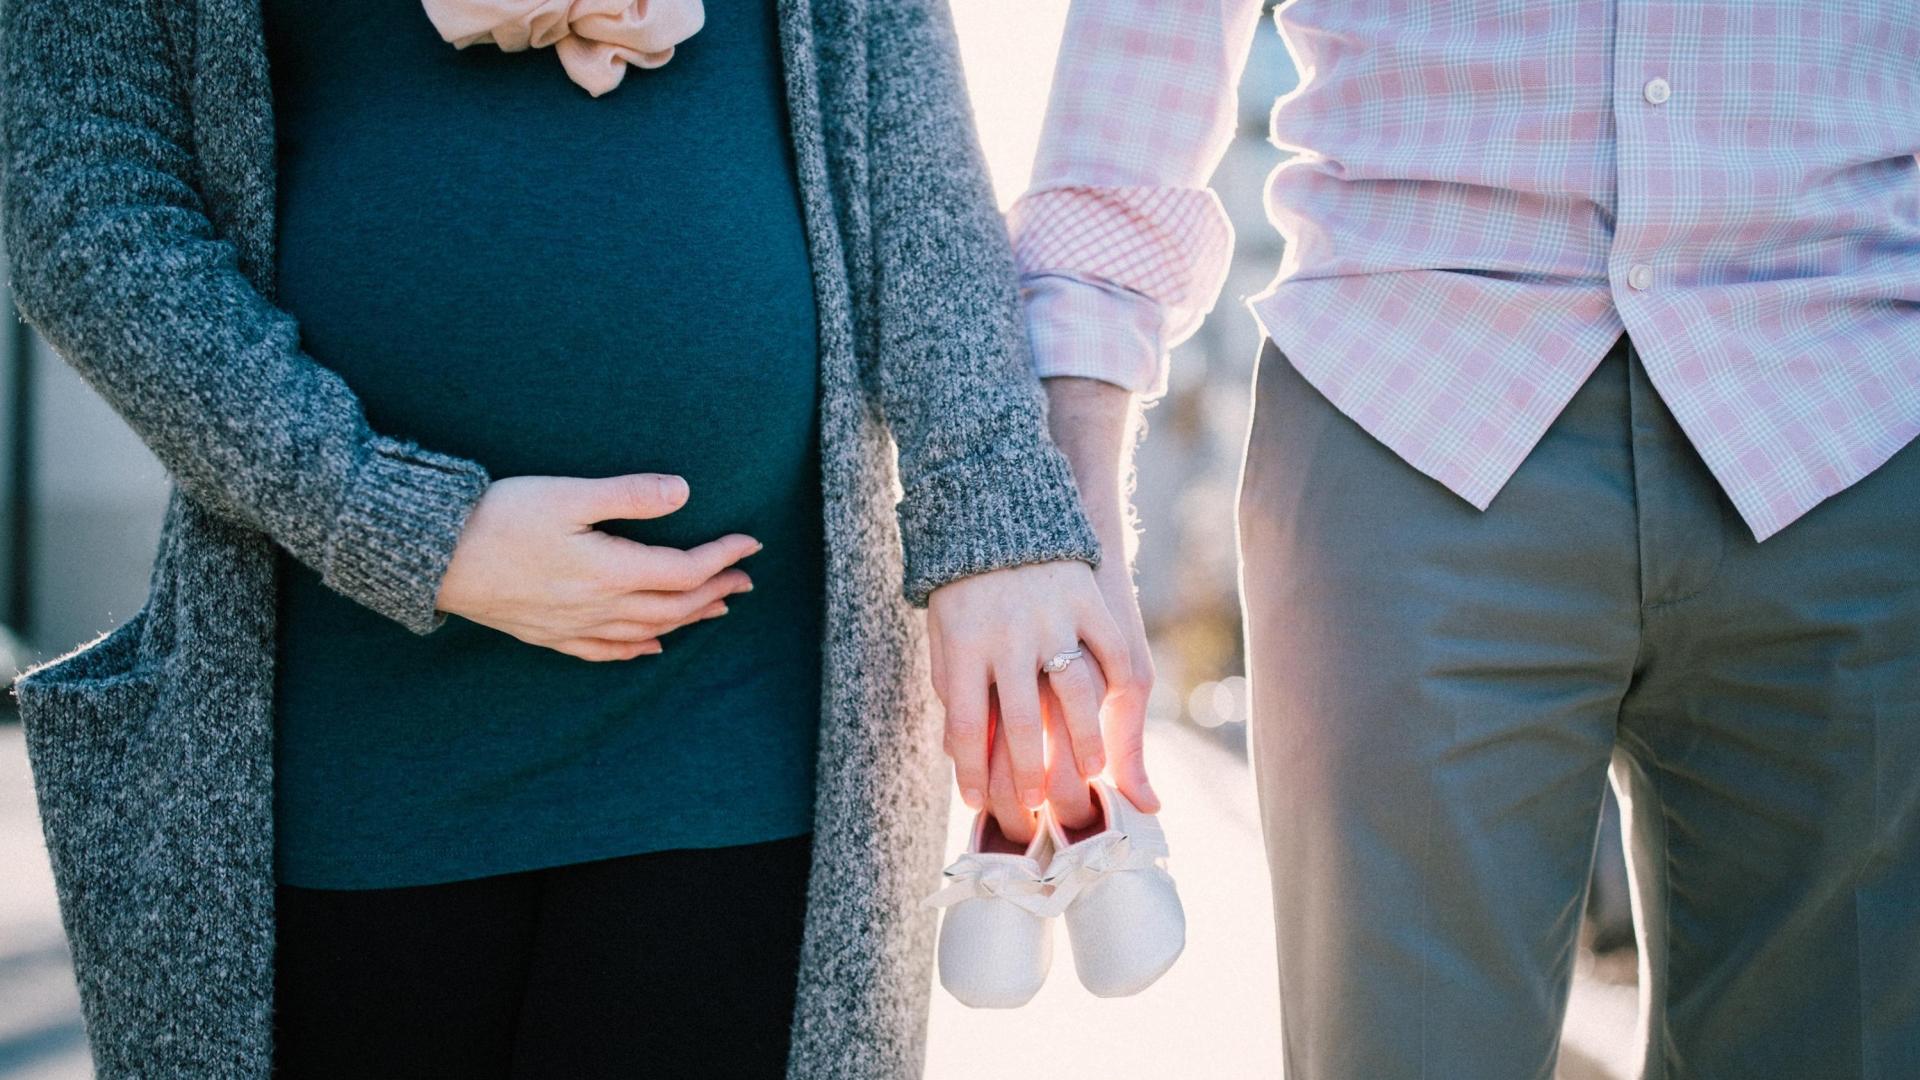 Man and Pregnant Woman holding hands with 2 baby shoes in their hands